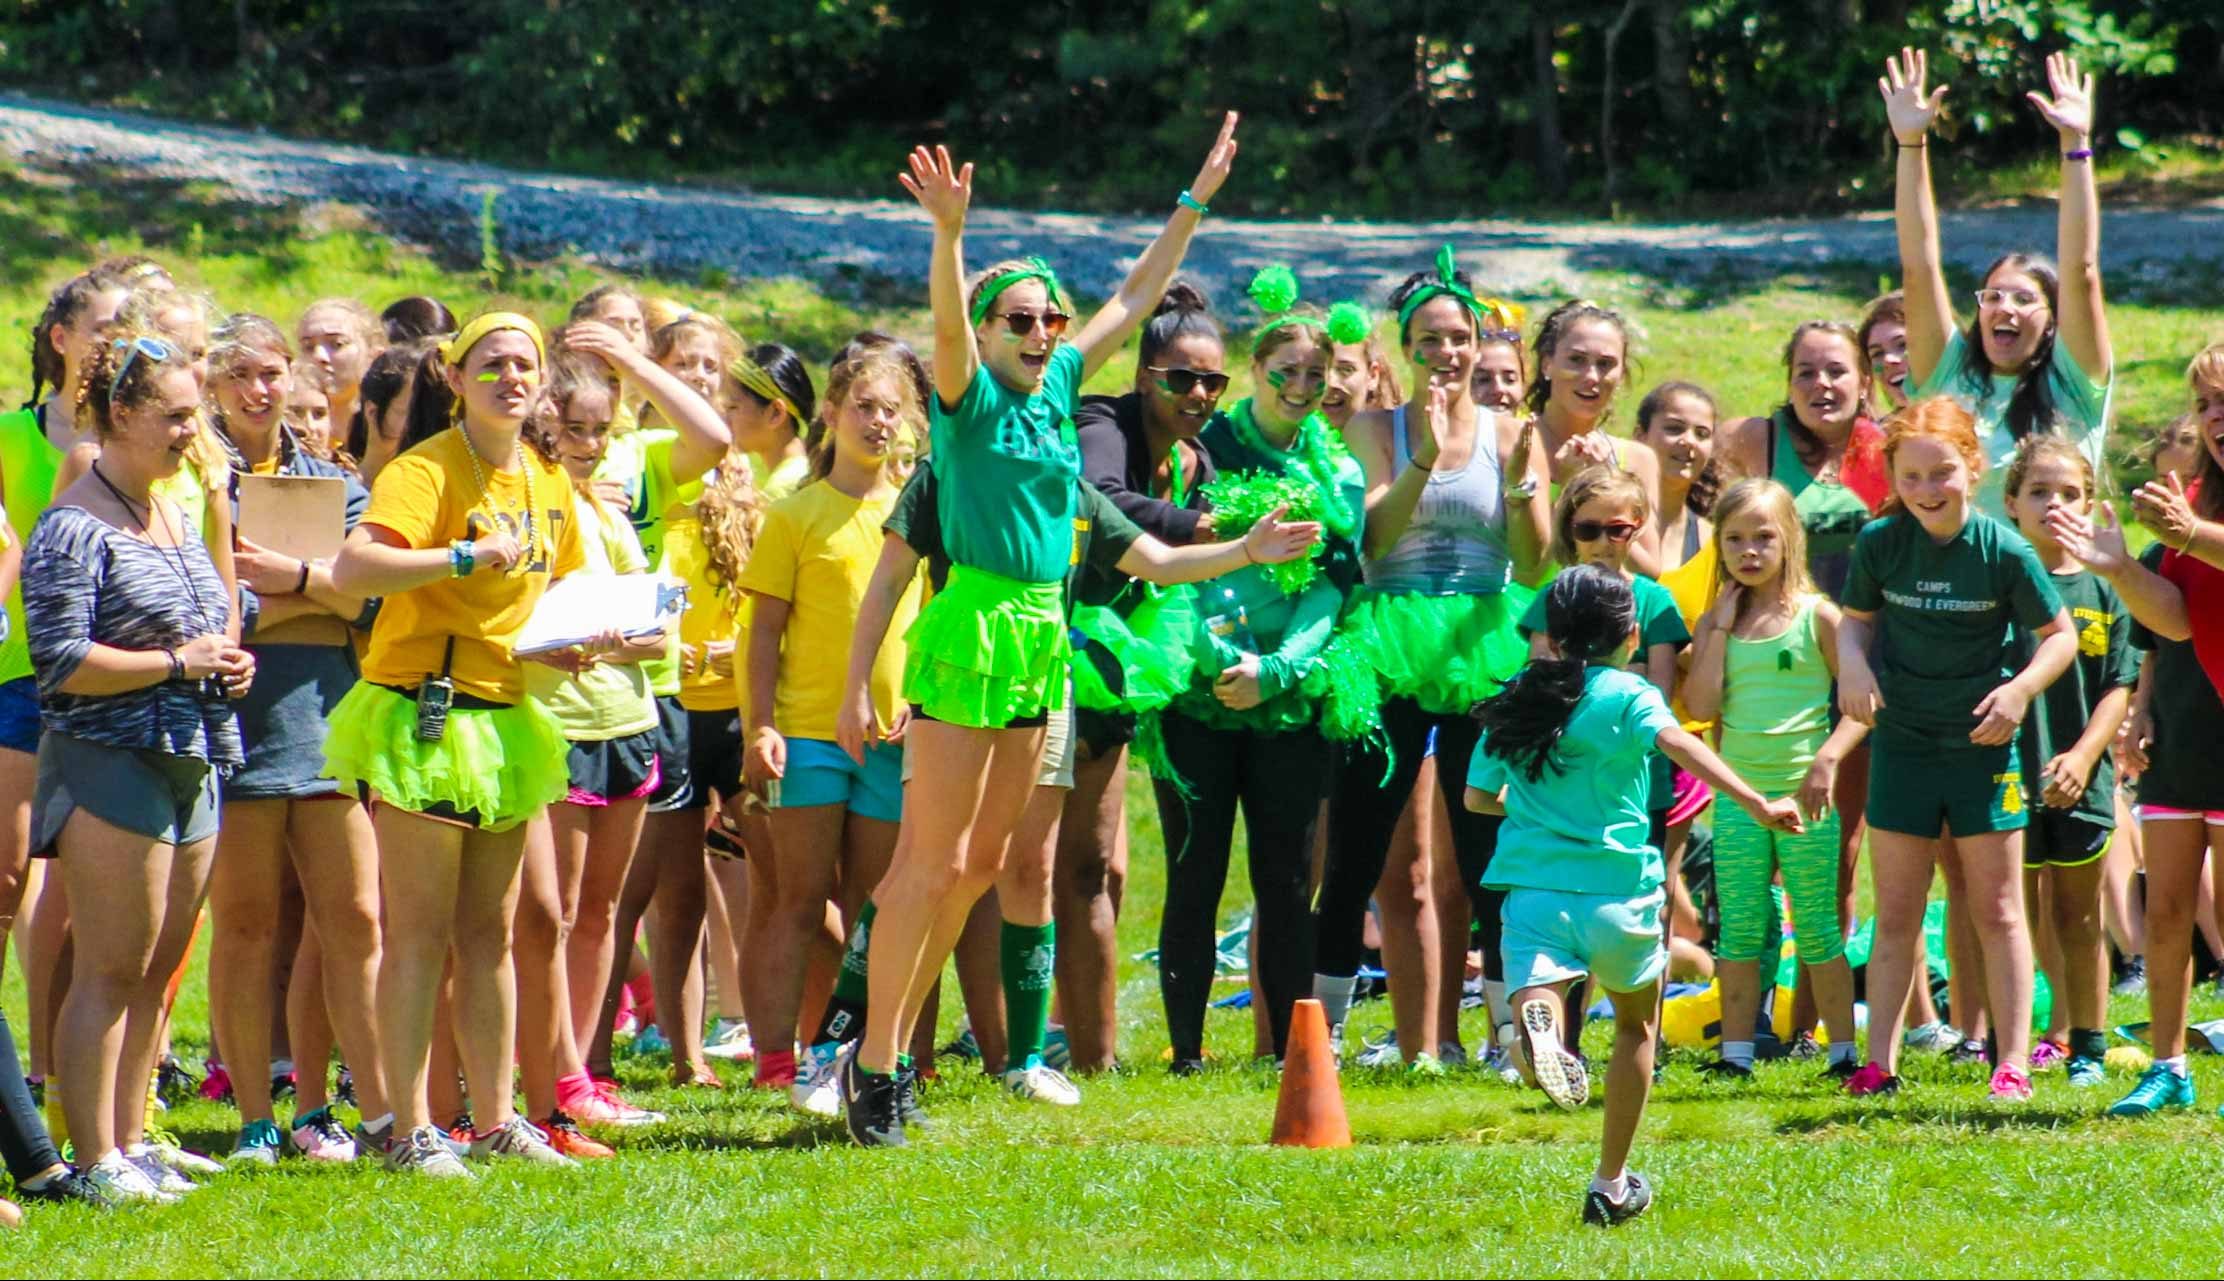 Running for color war competition and campers cheering